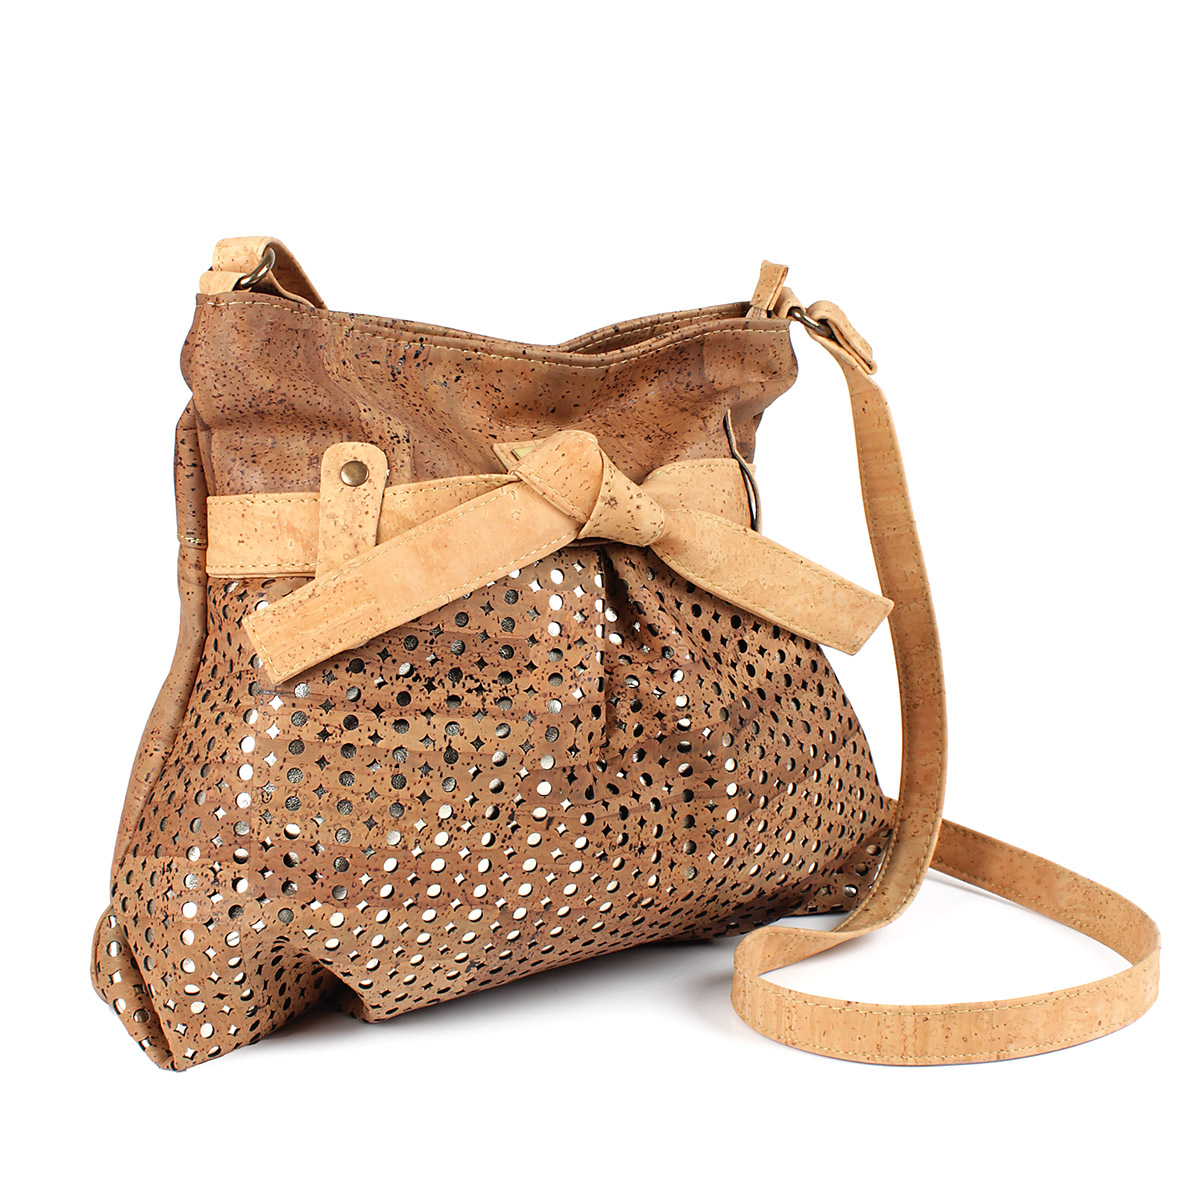 Cork Products, Bags and Purses from Portugal Stock Photo - Image of money,  basket: 150506418